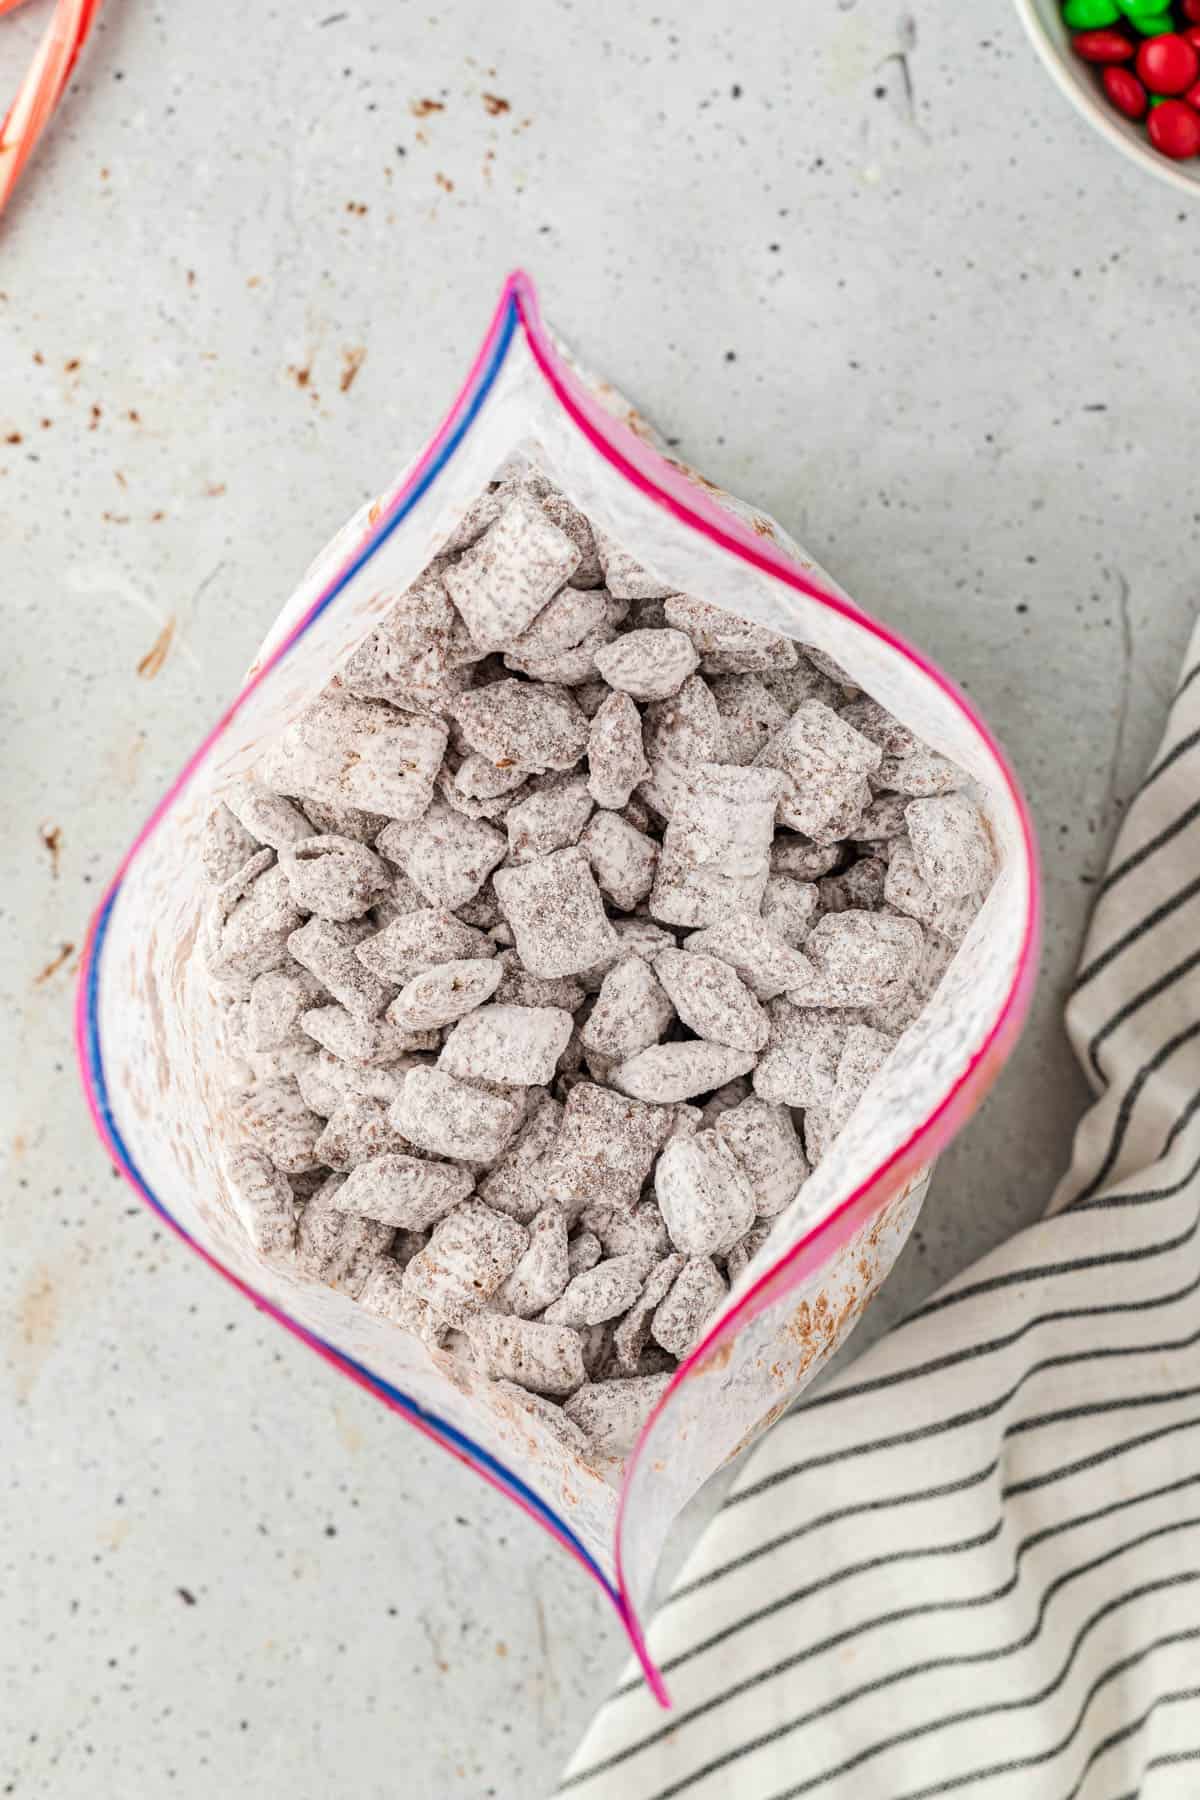 Chex Mix puppy chow that has been coated with powdered sugar in a bag.